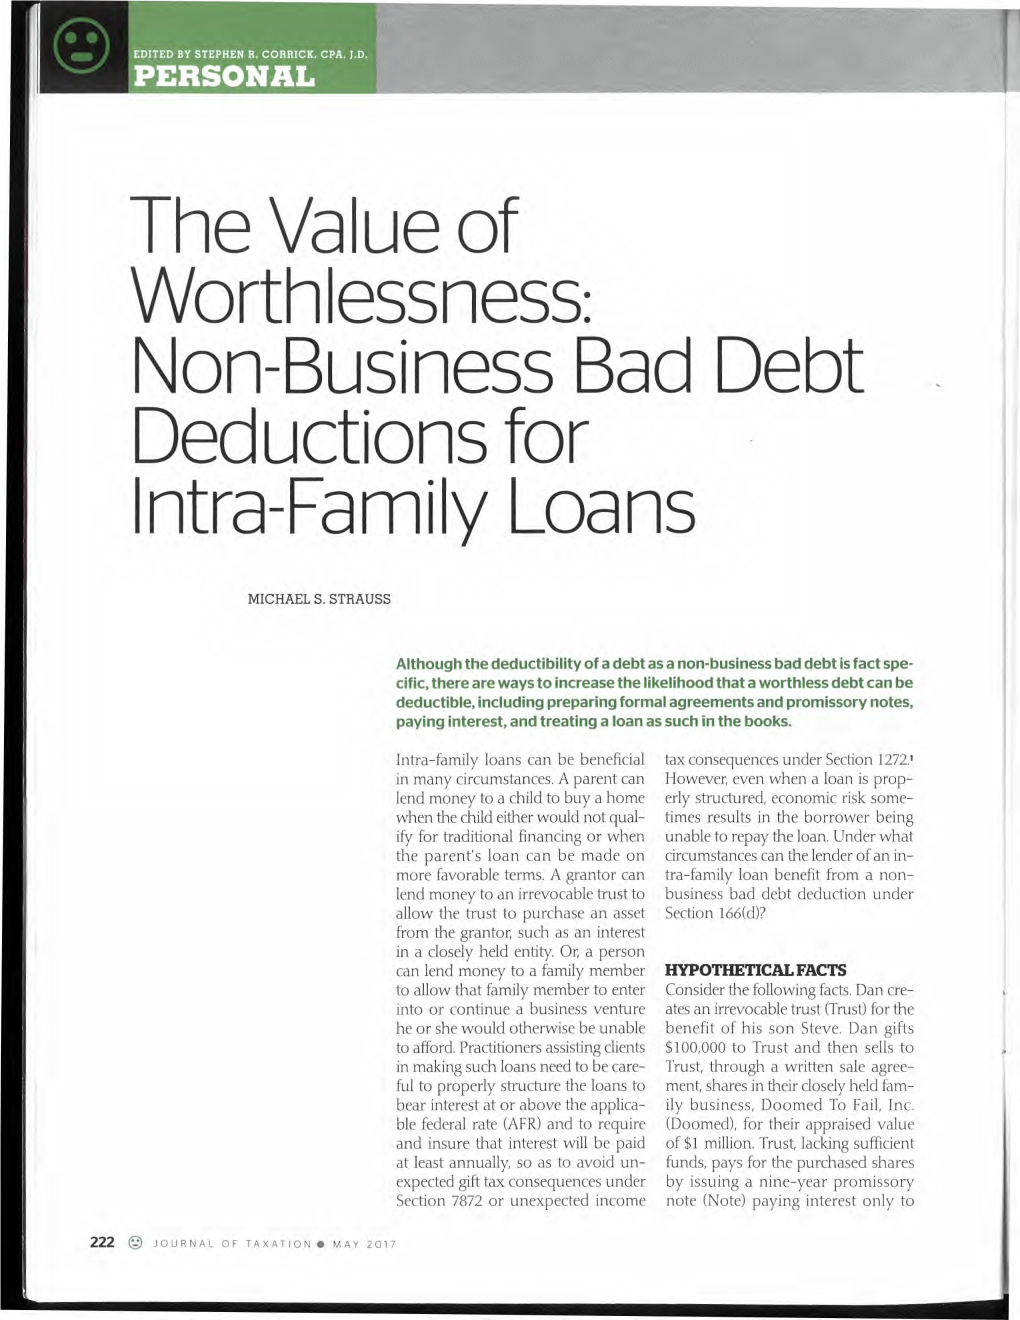 The Value of Worthlessness: Non-Business Bad Debt Deductions for Intra-Family Loans